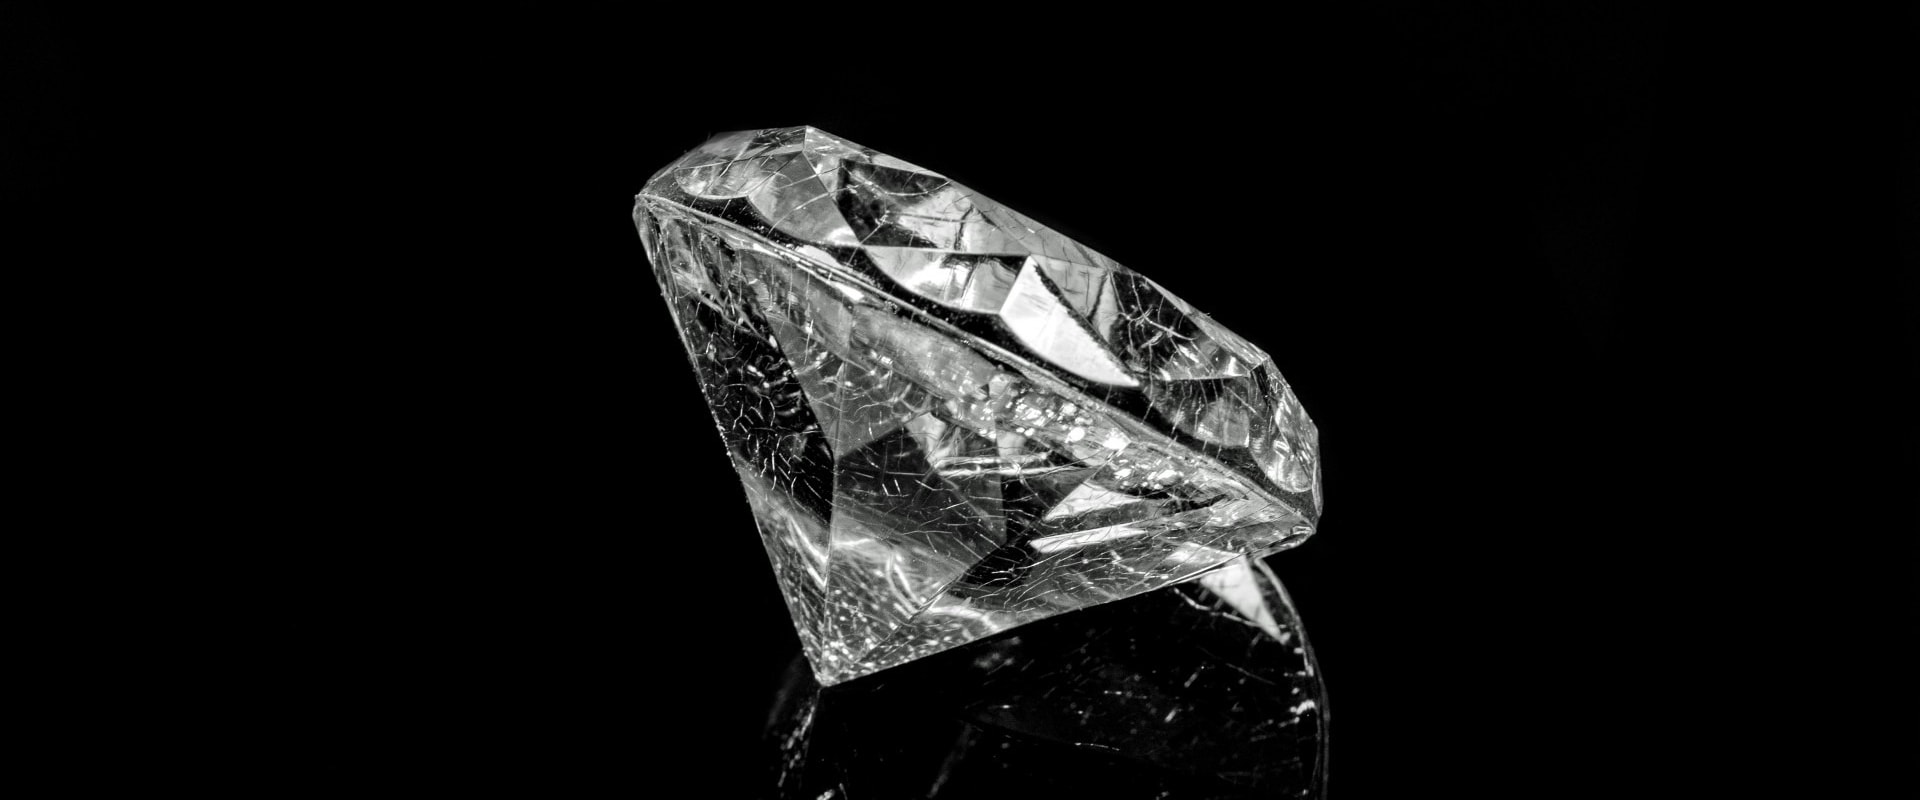 What are some tips for buying lab-created diamonds or sauces?